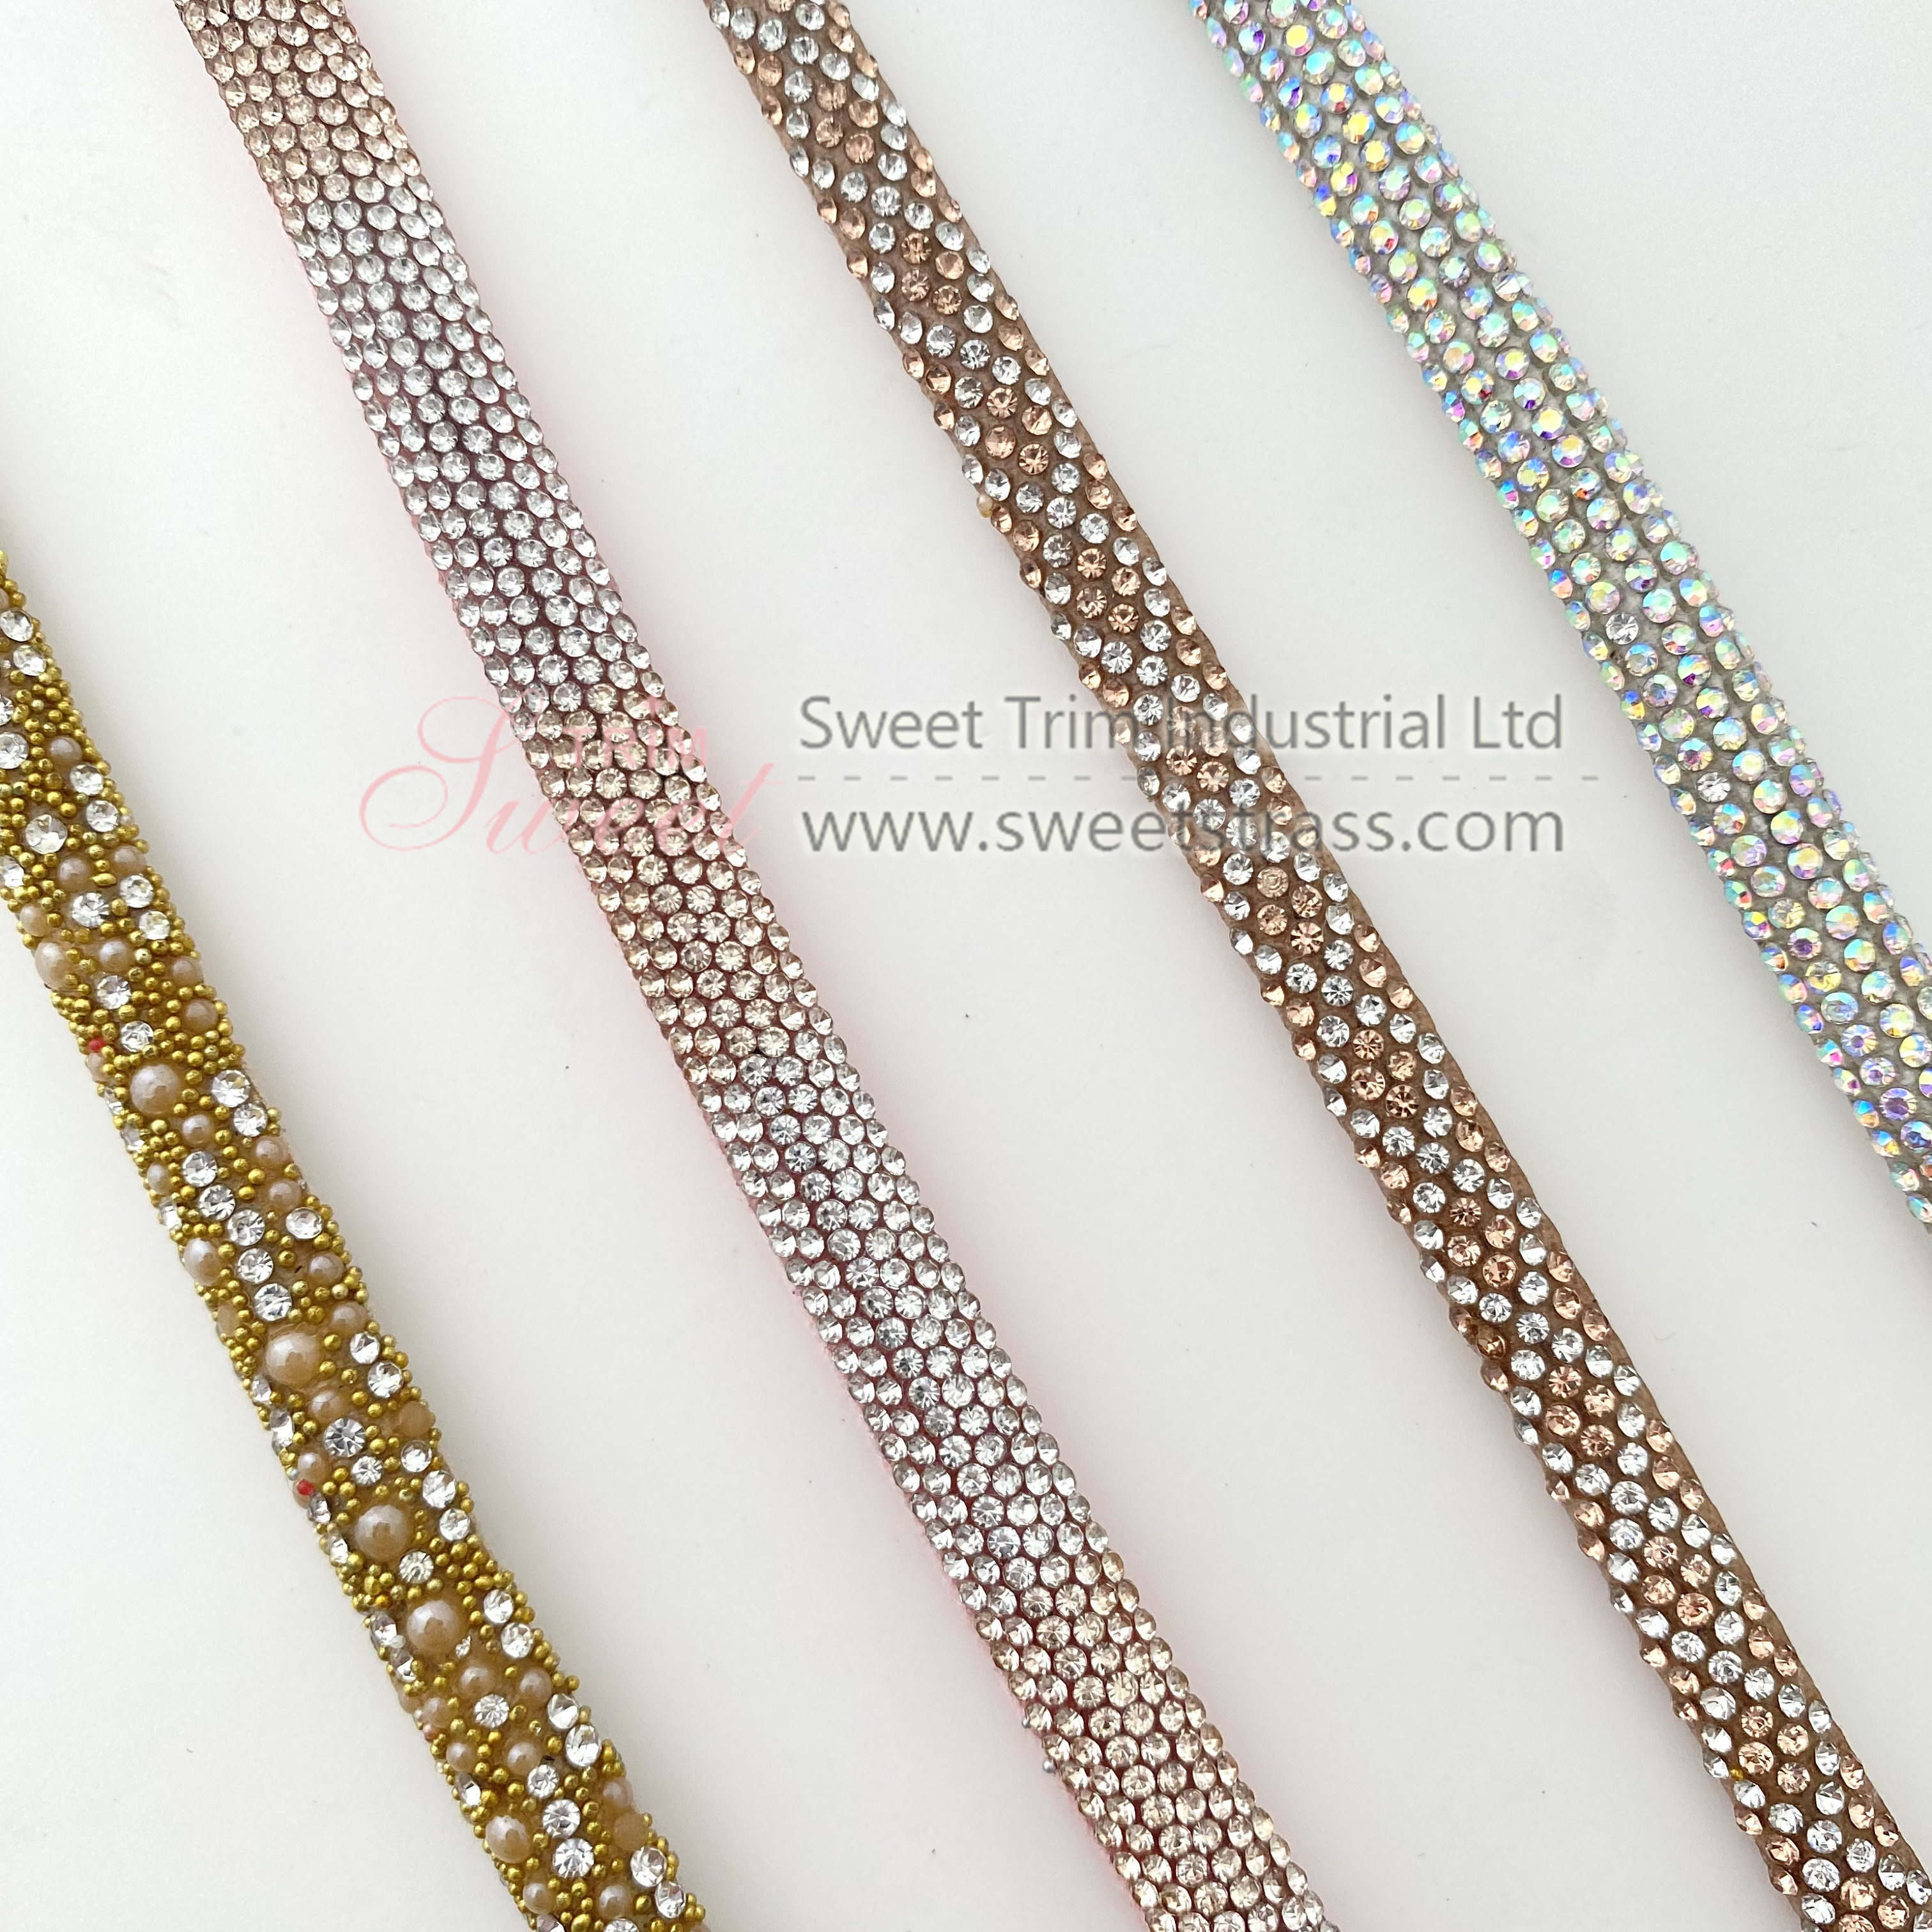 Wholesale 4 Rows Of 5 Rows Of Semicircle Half Face Rhinestone Rope Crystal Strips For Popular Decorative Shoes